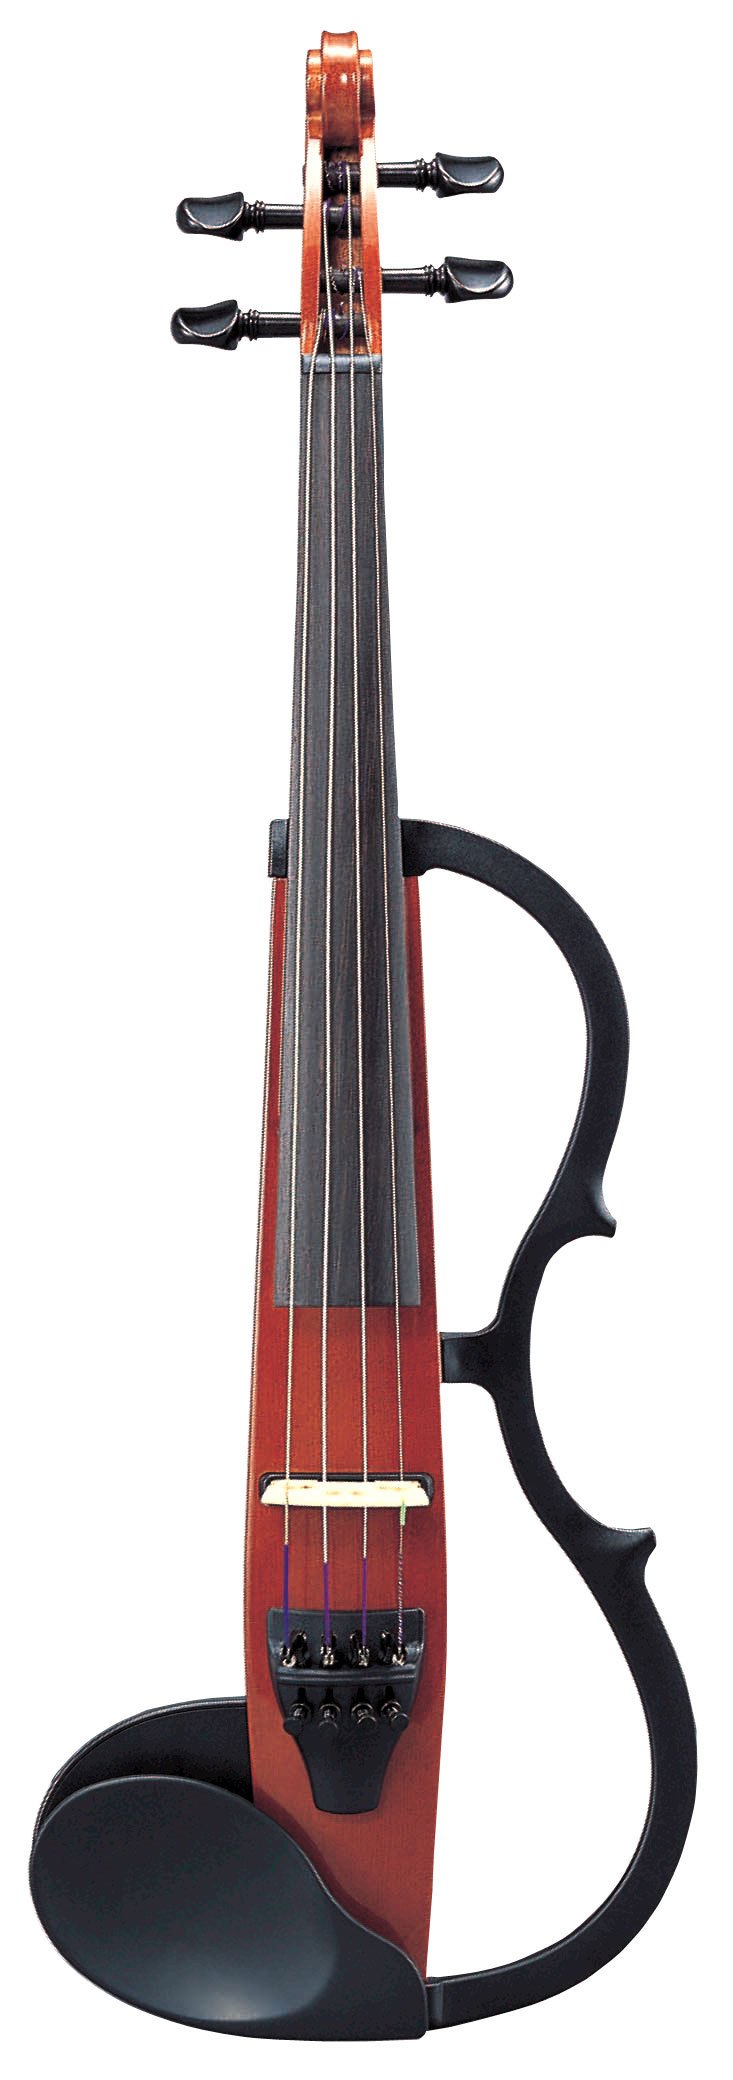 SV130 - Overview - Silent™ Series Violins, Violas, Cellos, and